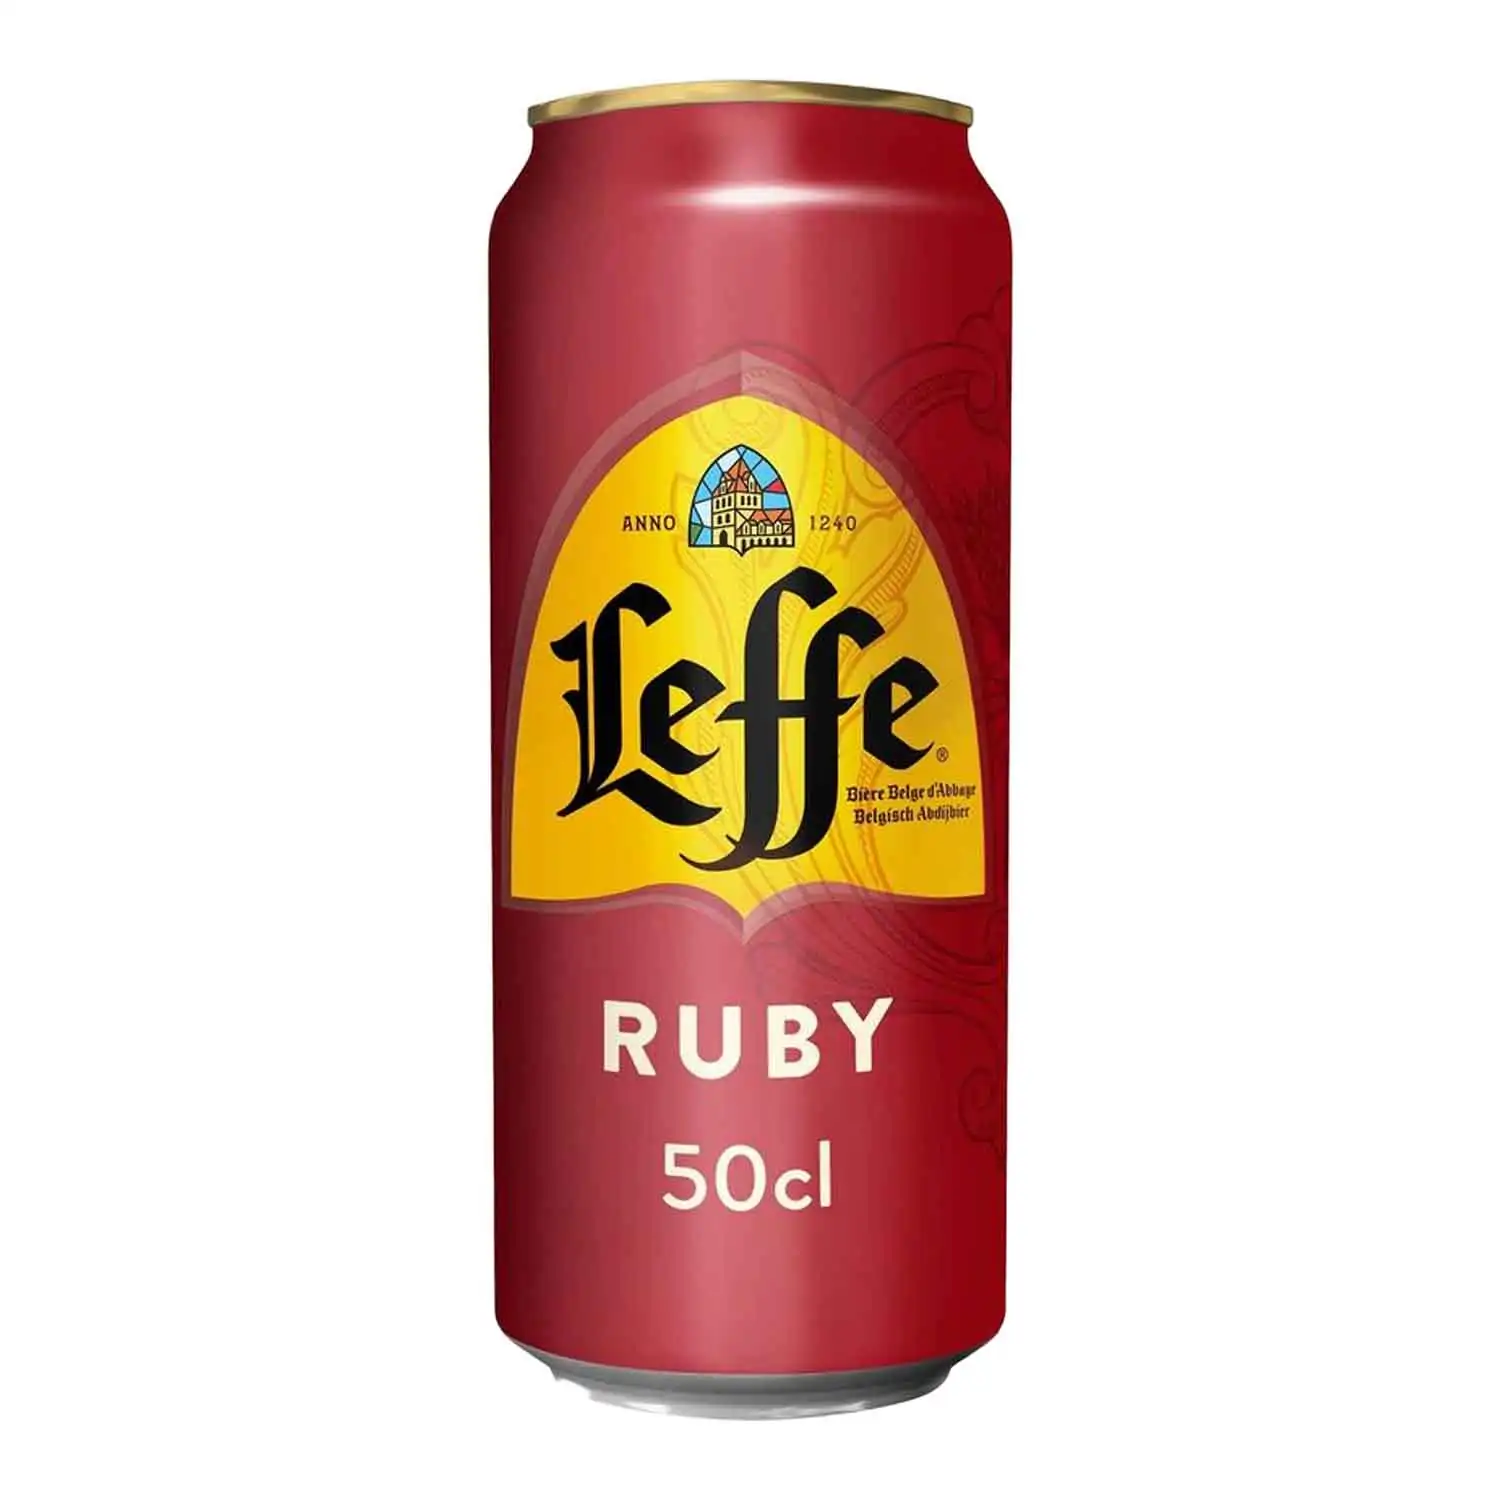 Leffe ruby 50cl Alc 5% - Buy at Real Tobacco